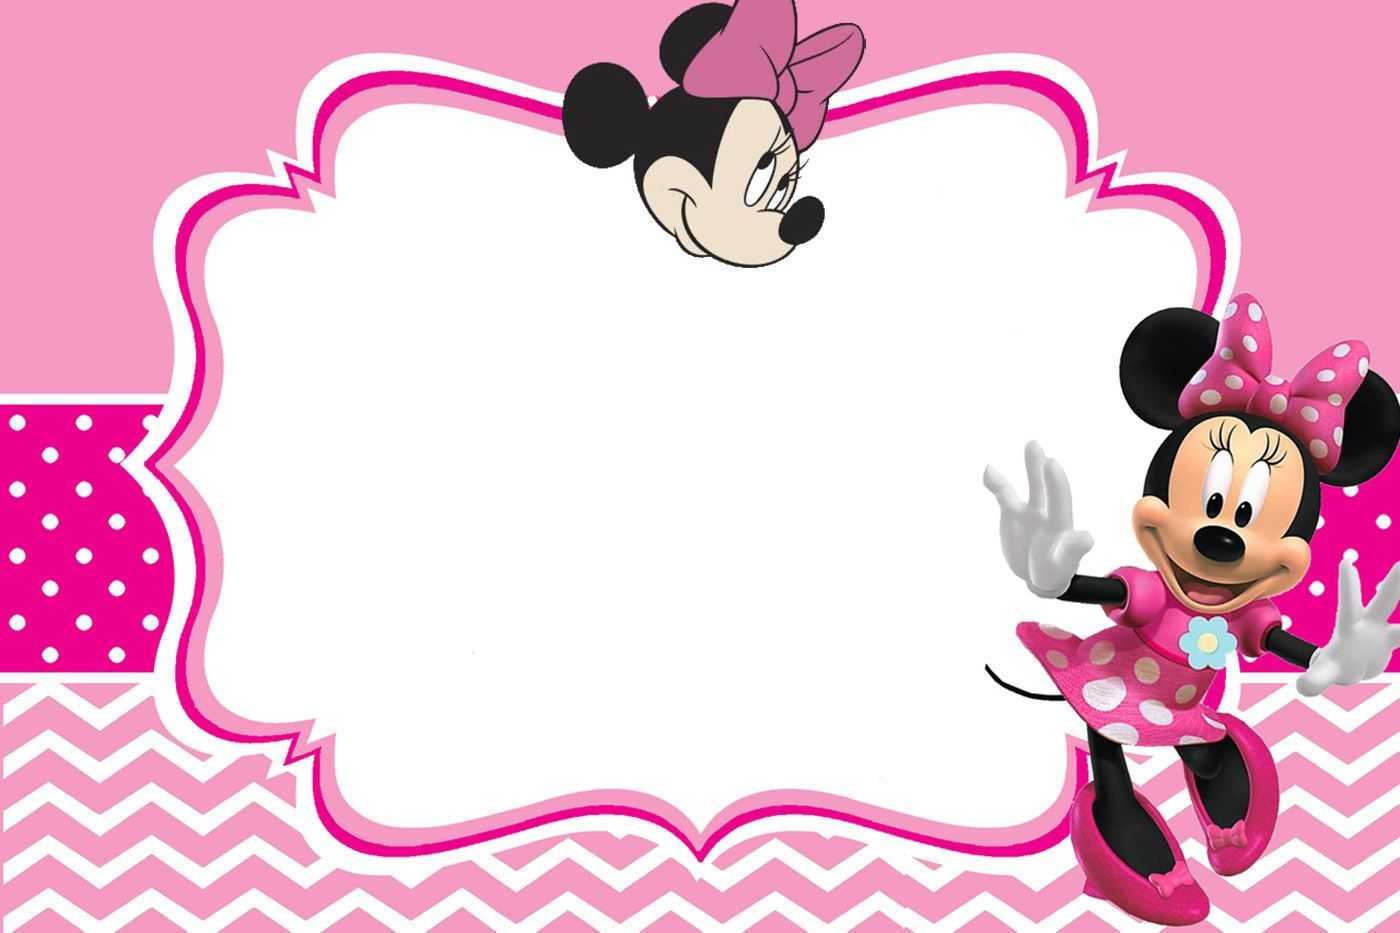 Minnie Mouse Invitation Card Design | Jmj In 2019 | Mickey With Minnie Mouse Card Templates